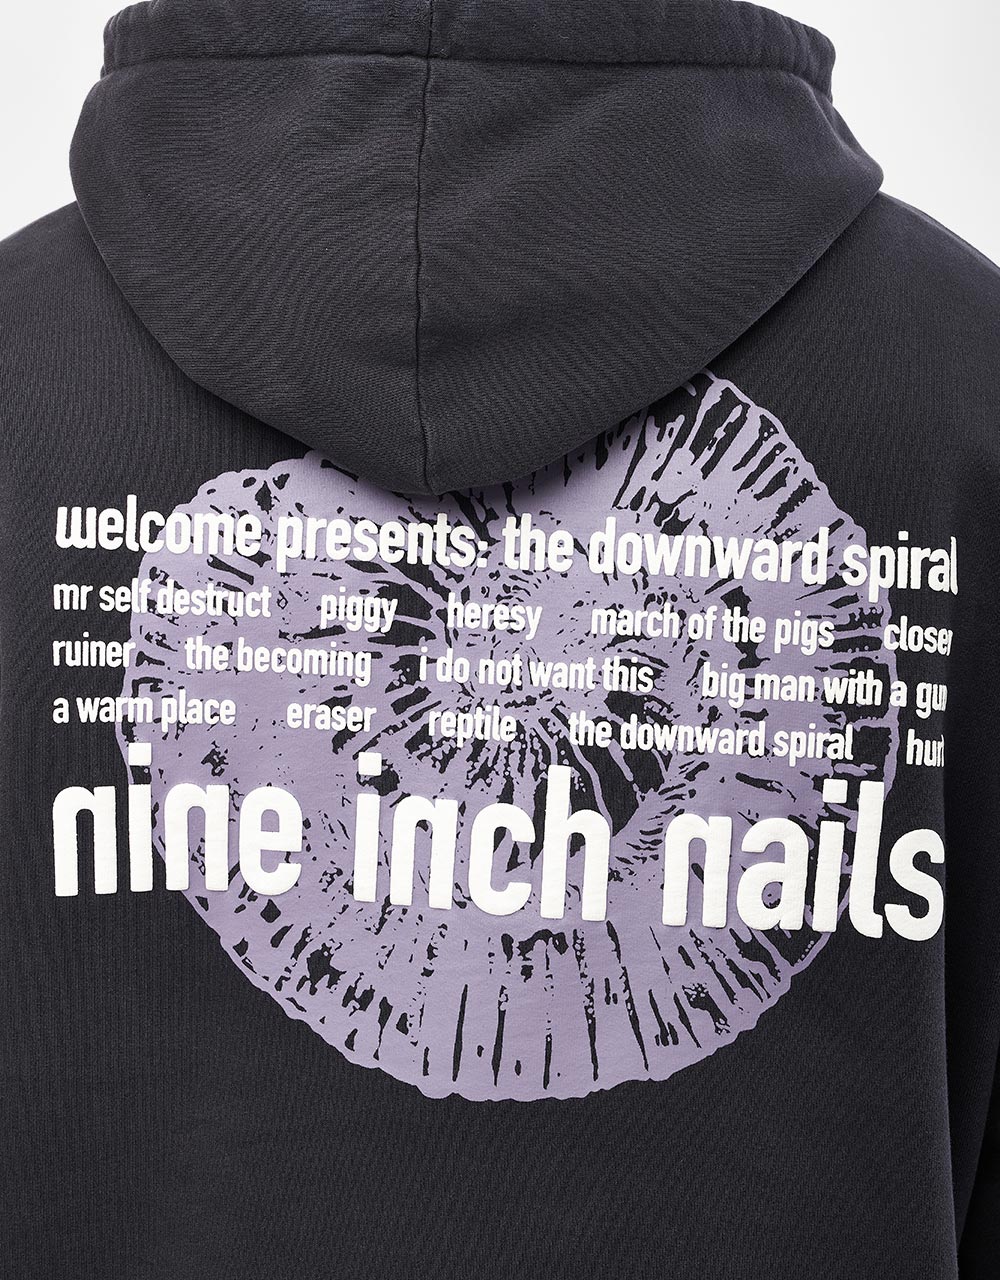 Welcome x Nine Inch Nails Eraser Pigment-Dyed Pullover Hoodie - Black